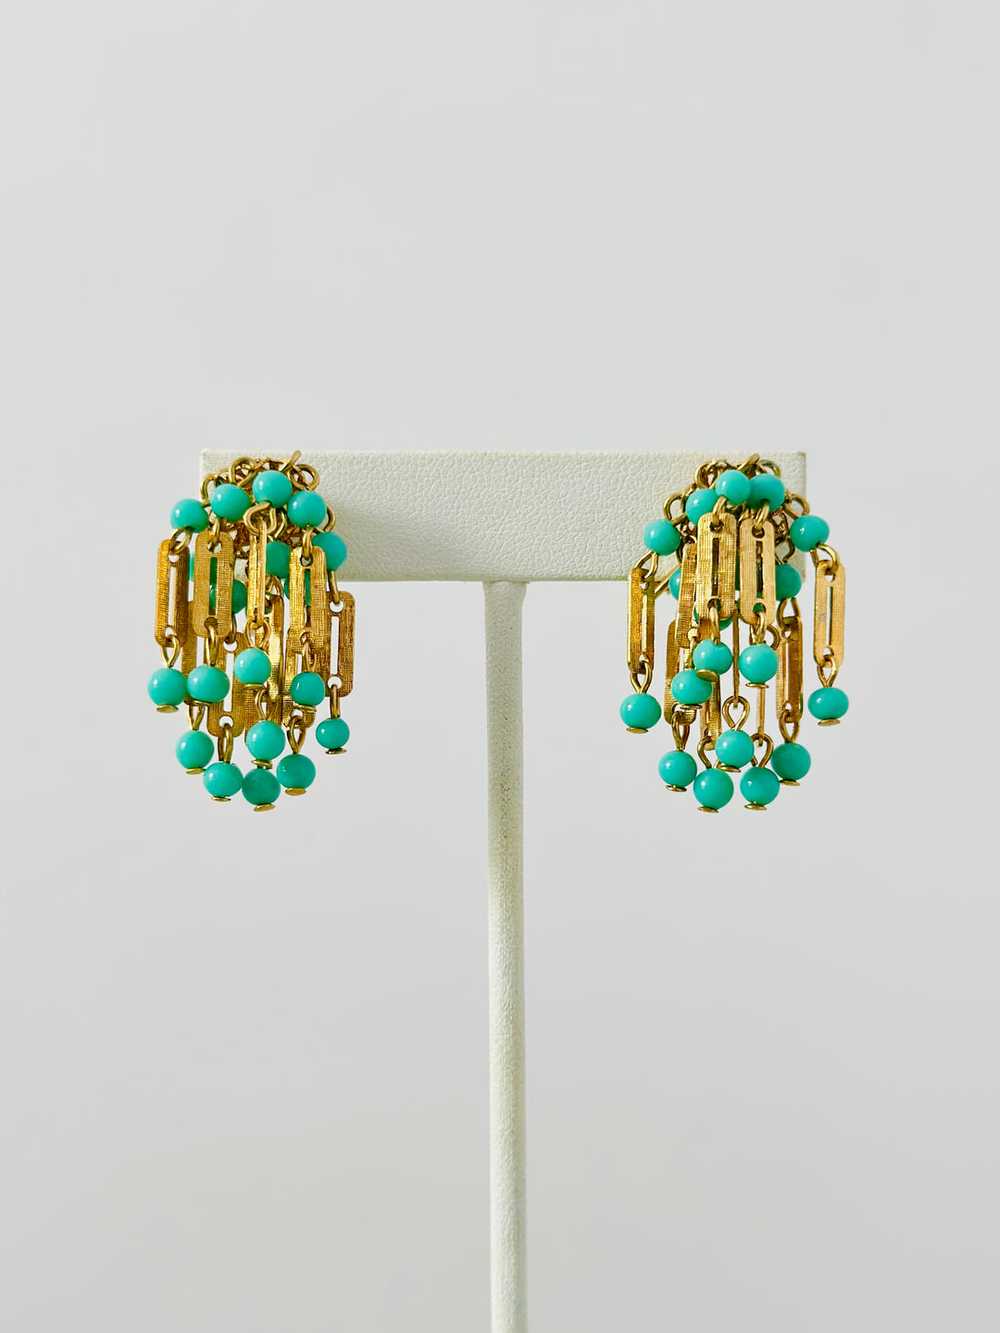 Vintage Turquoise Blue Cluster Earrings - image 3